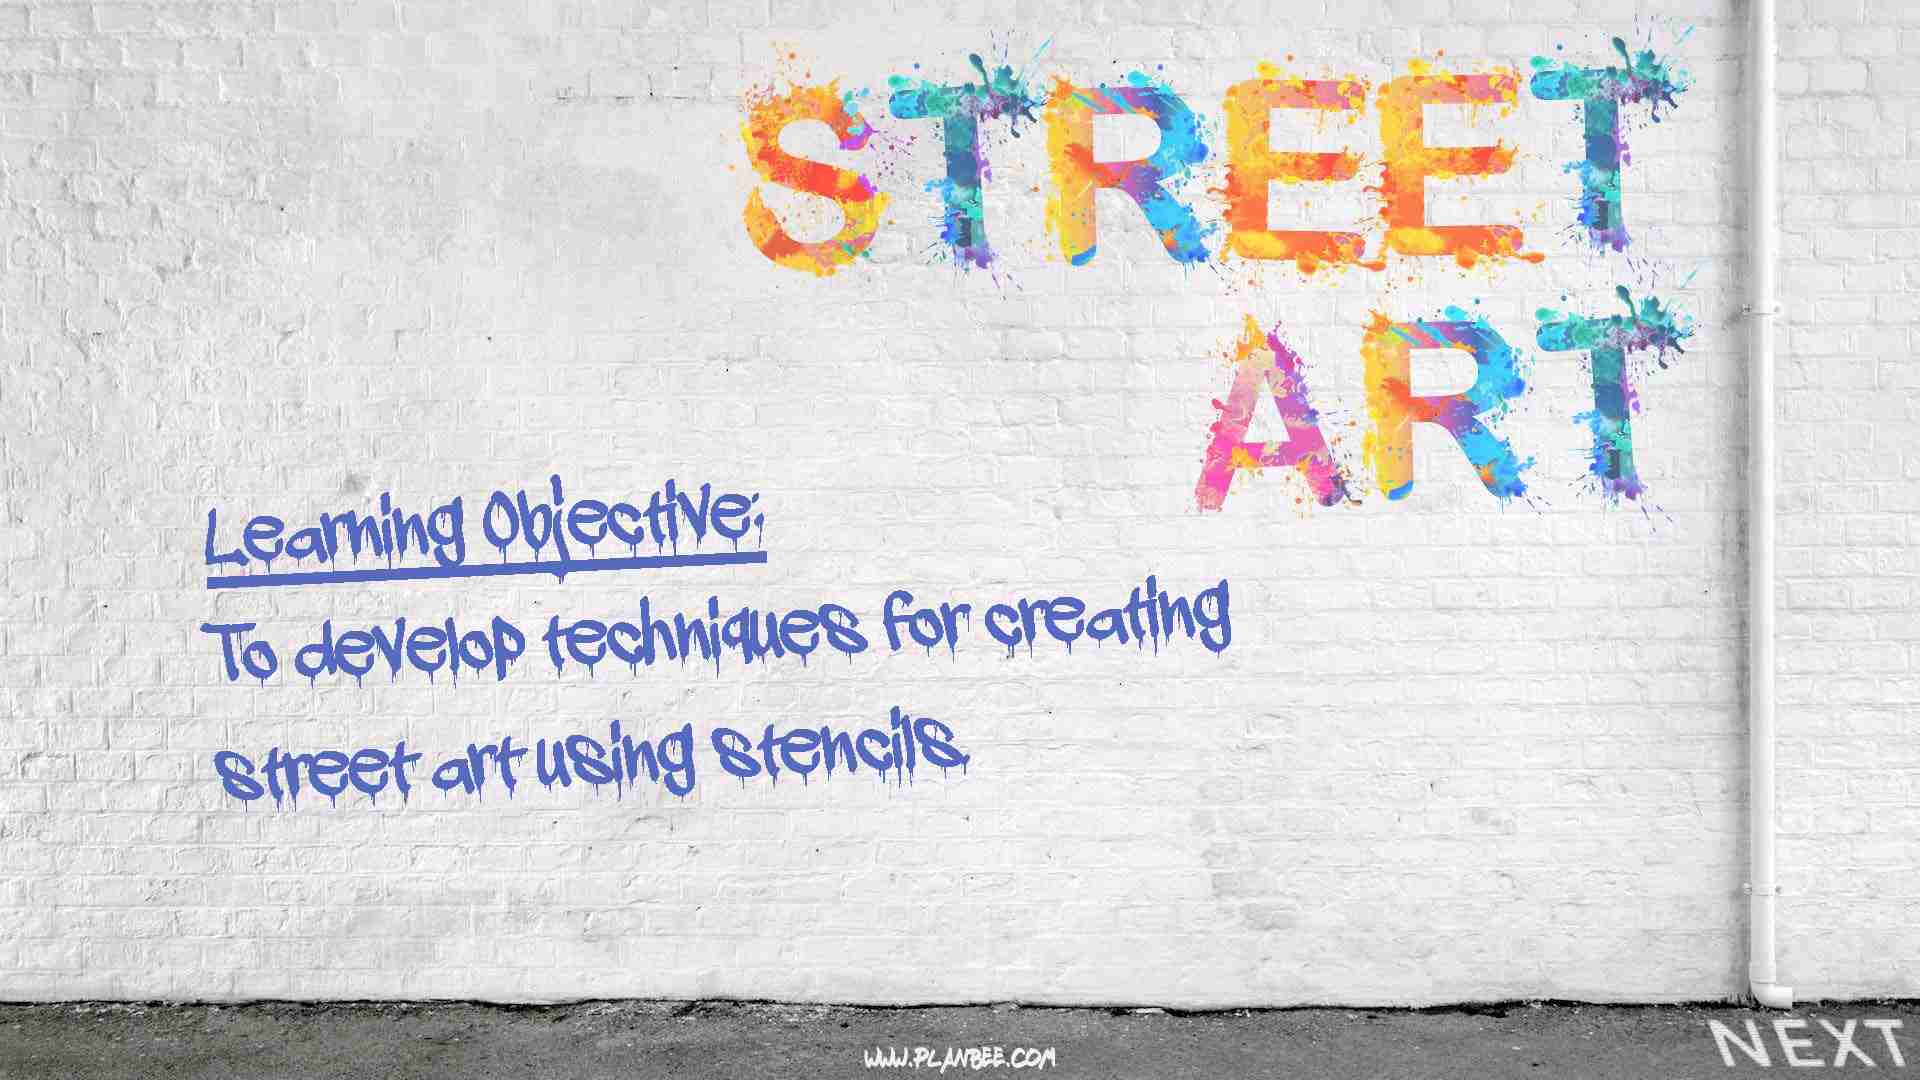 [PDF] To develop techniques for creating street art using stencils